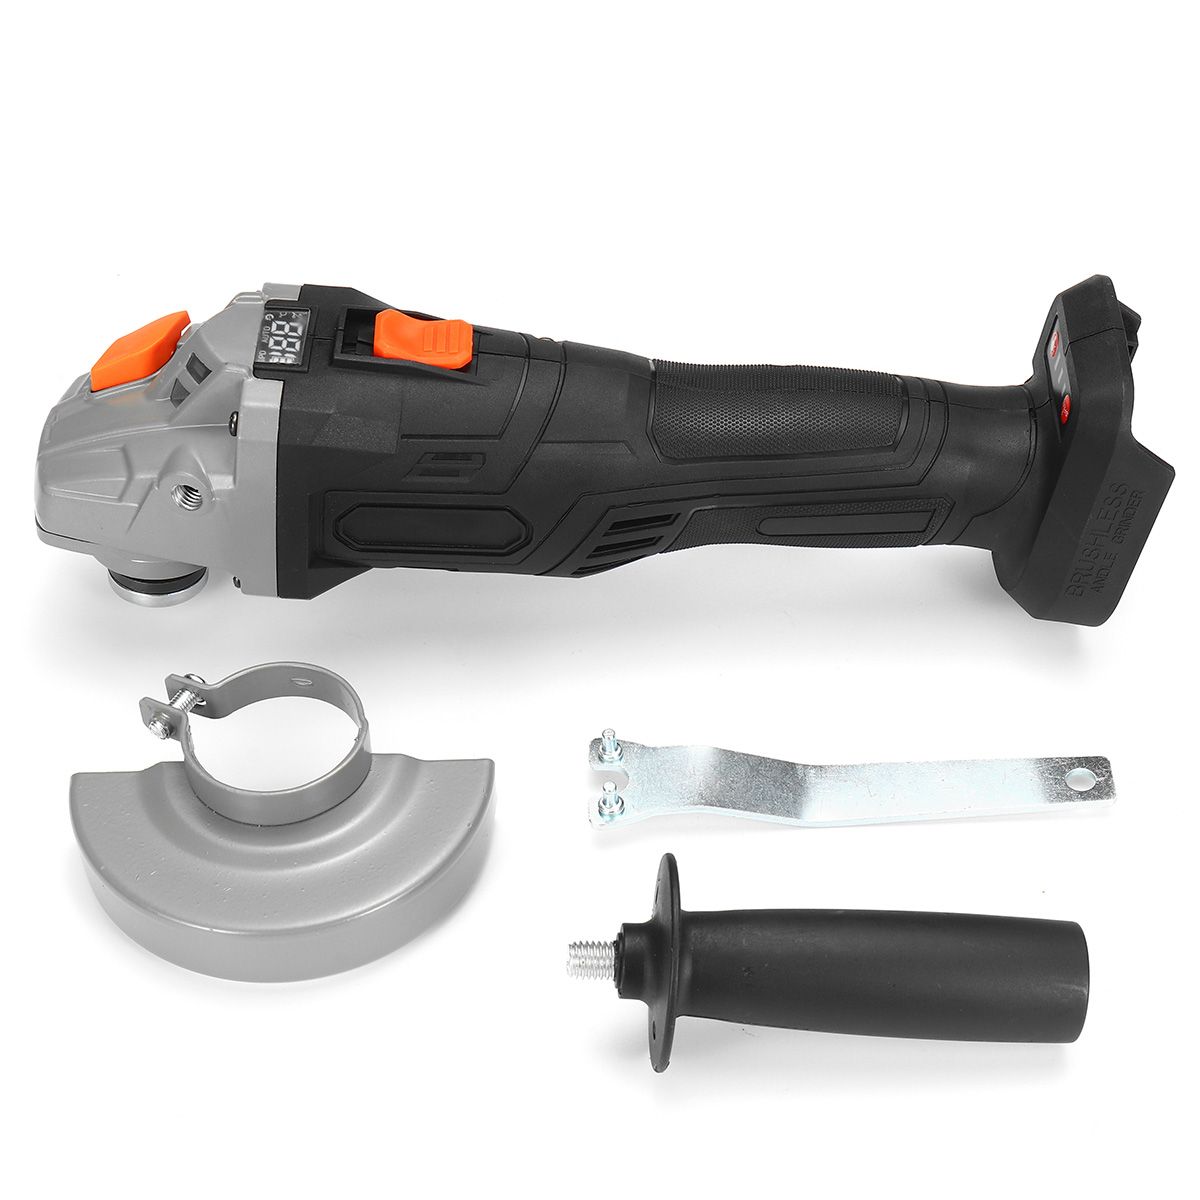 800W-100mm-Cordless-Brushless-Angle-Grinder-Fit-for-18V-Makita-Li-ion-Battery-1689004